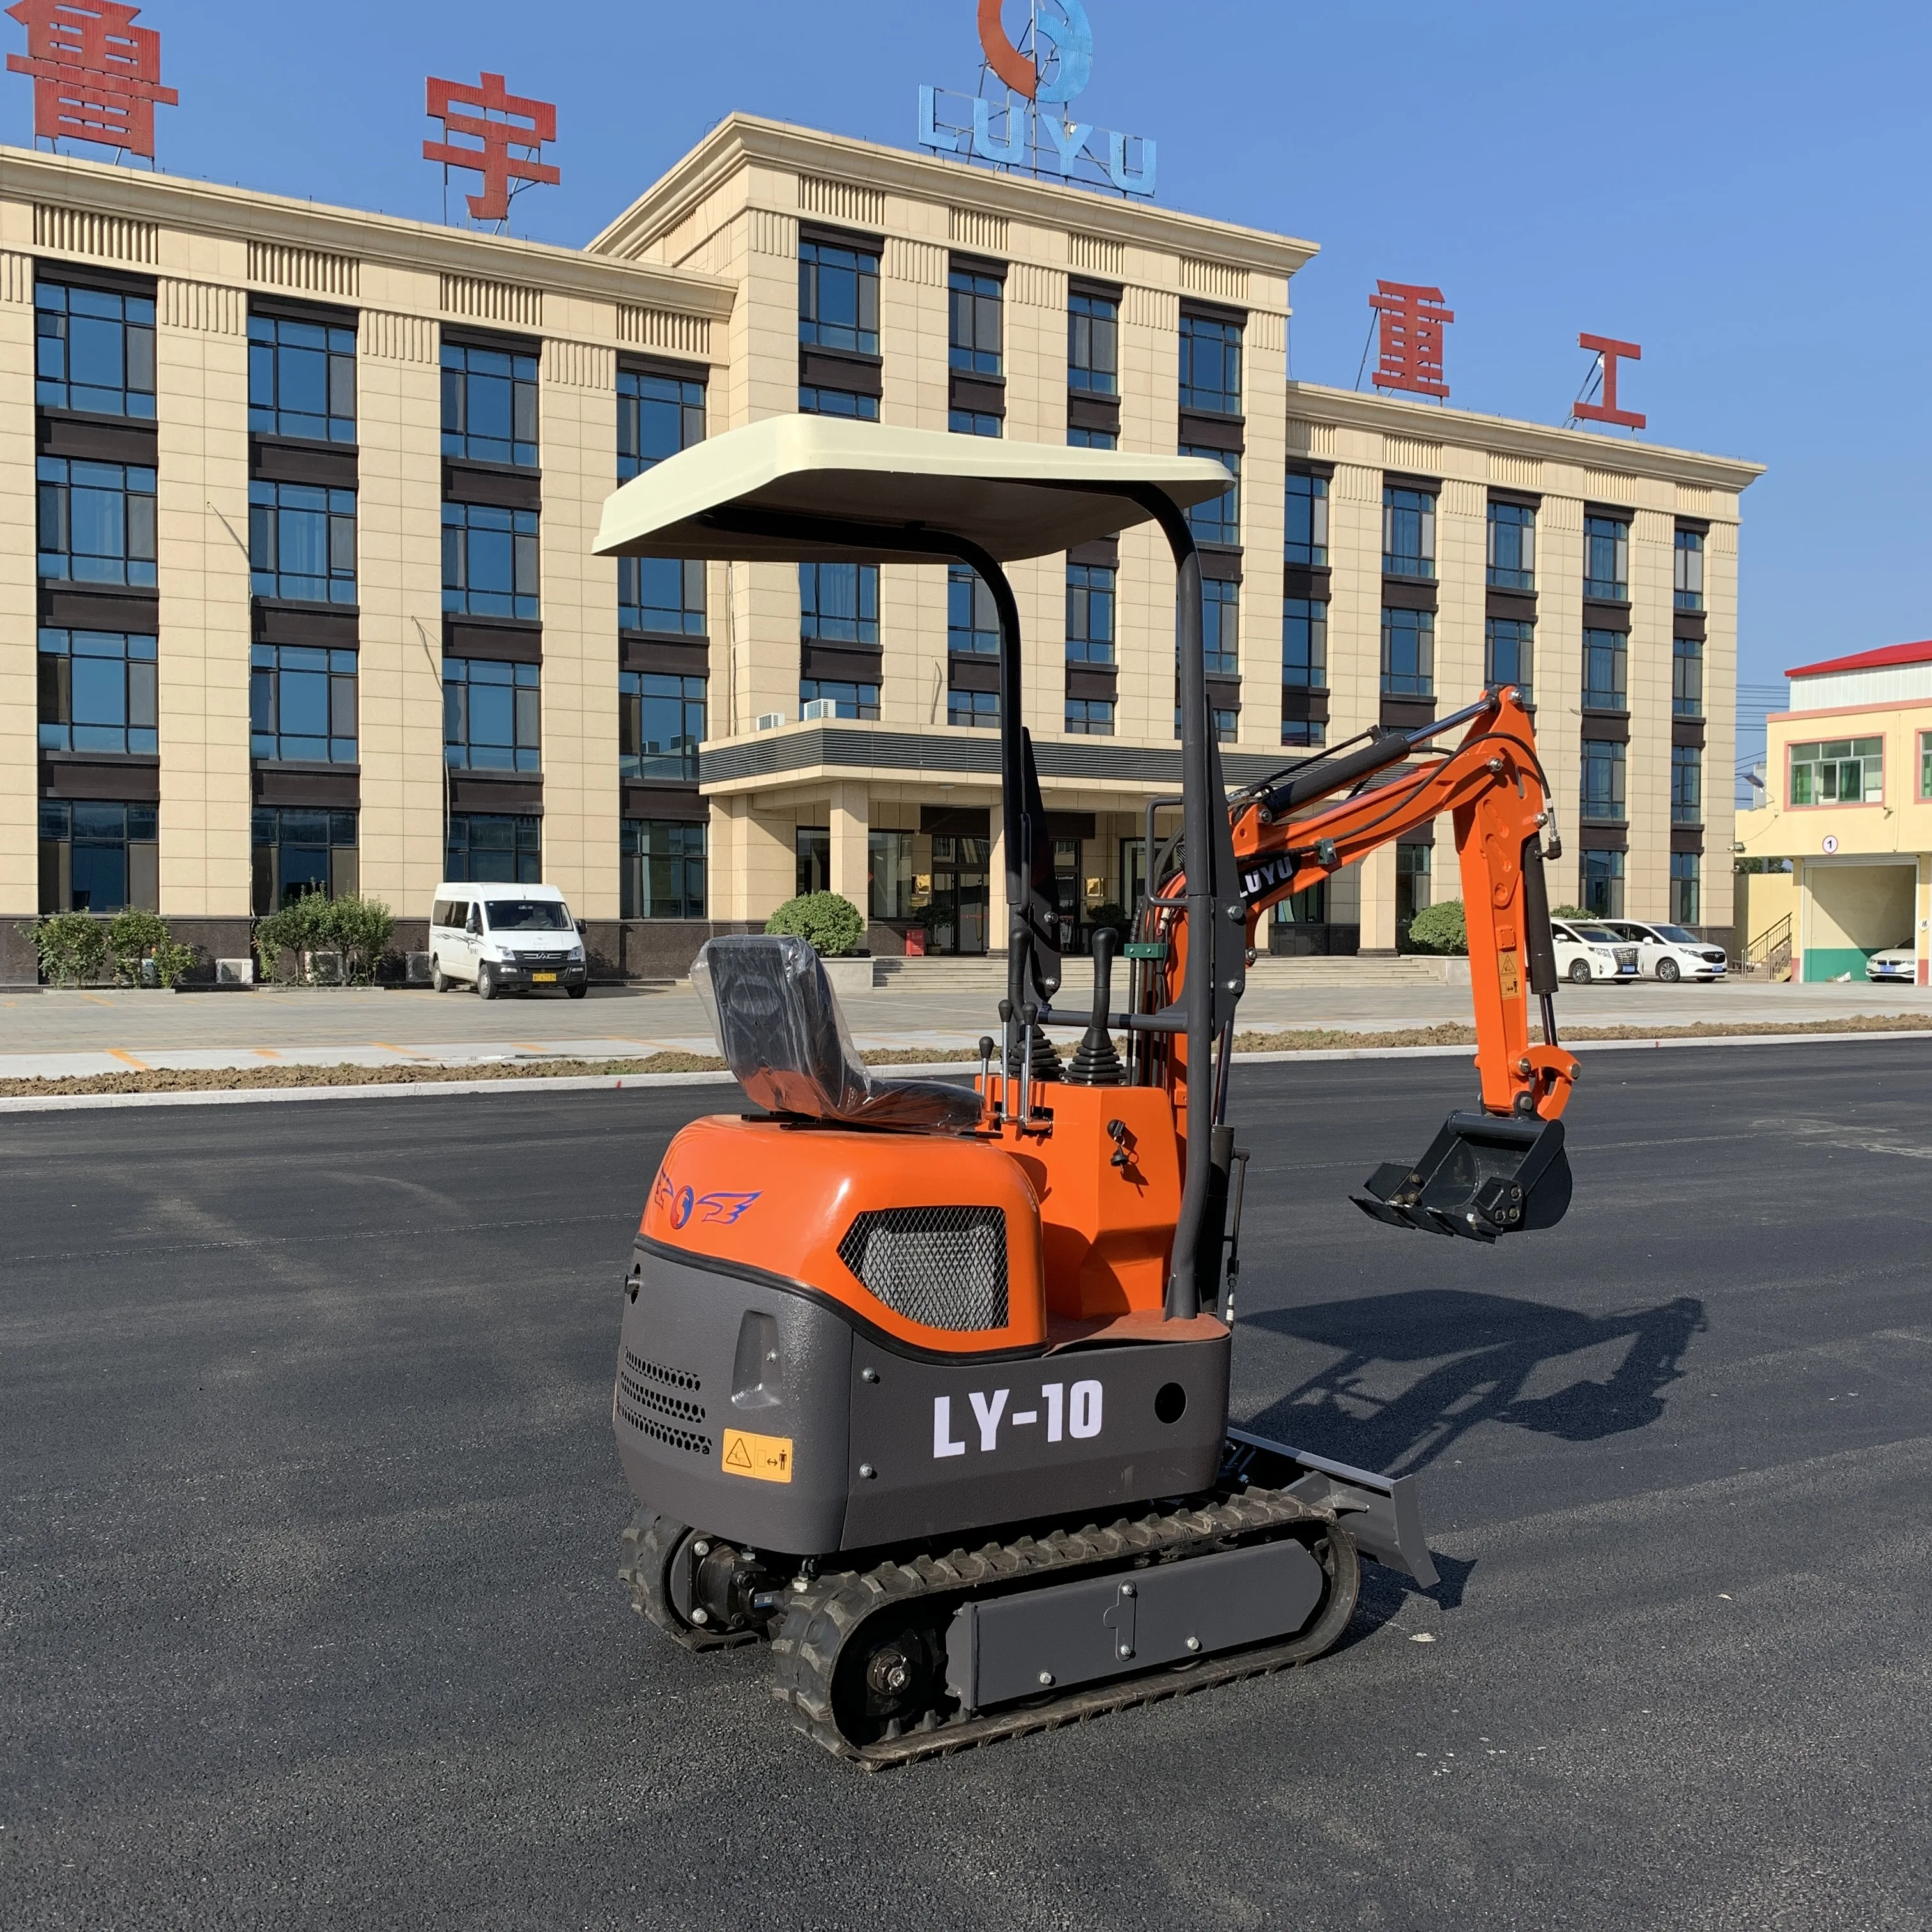 LUYU-10A China mini escavator 1T small digger excavators with rubber track mini excavator for sale china